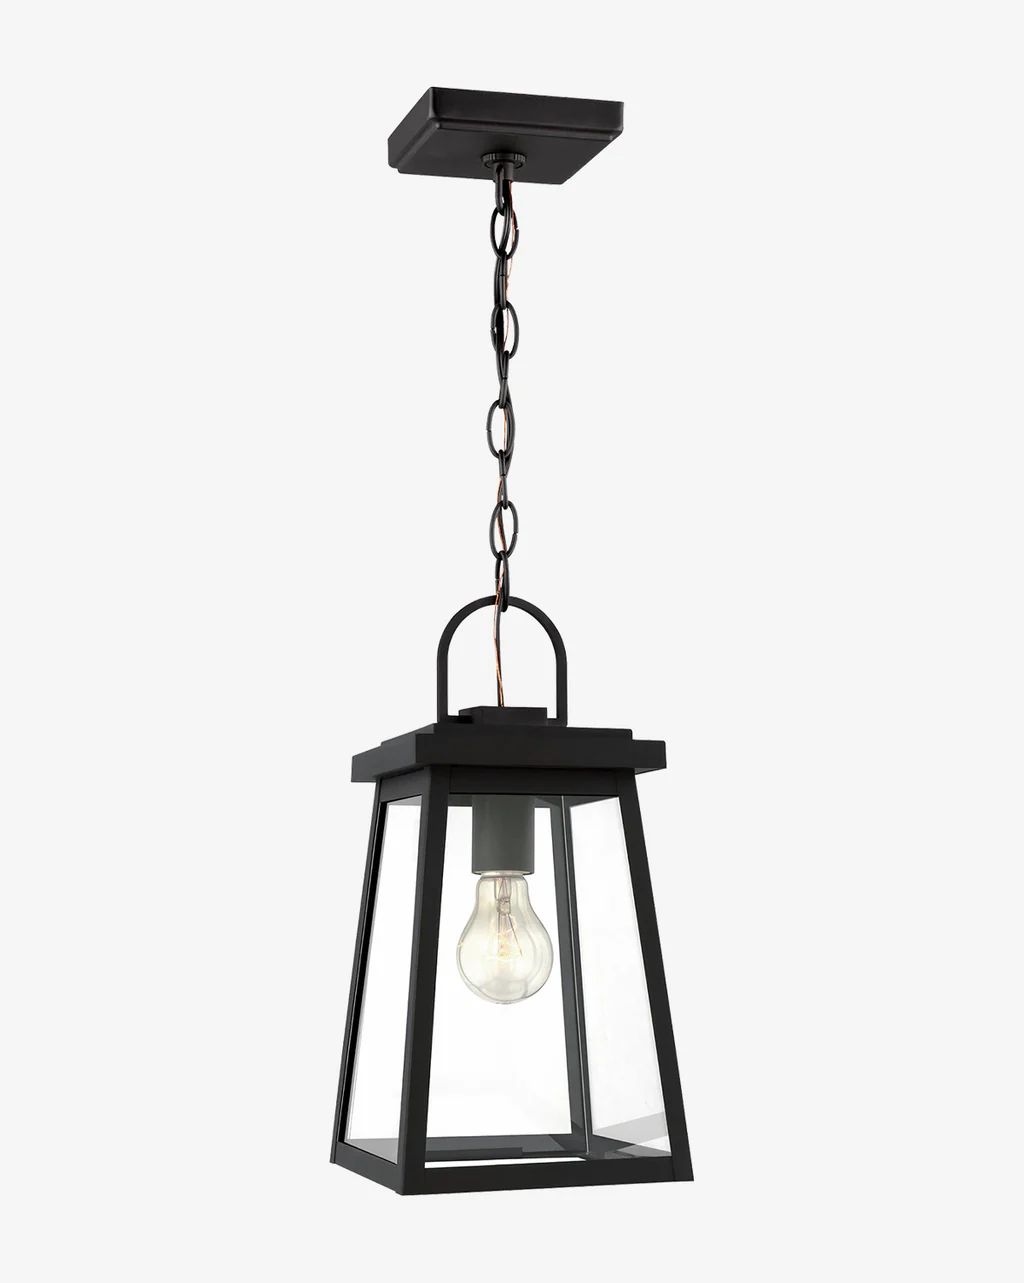 Founders One Light Outdoor Pendant | McGee & Co.